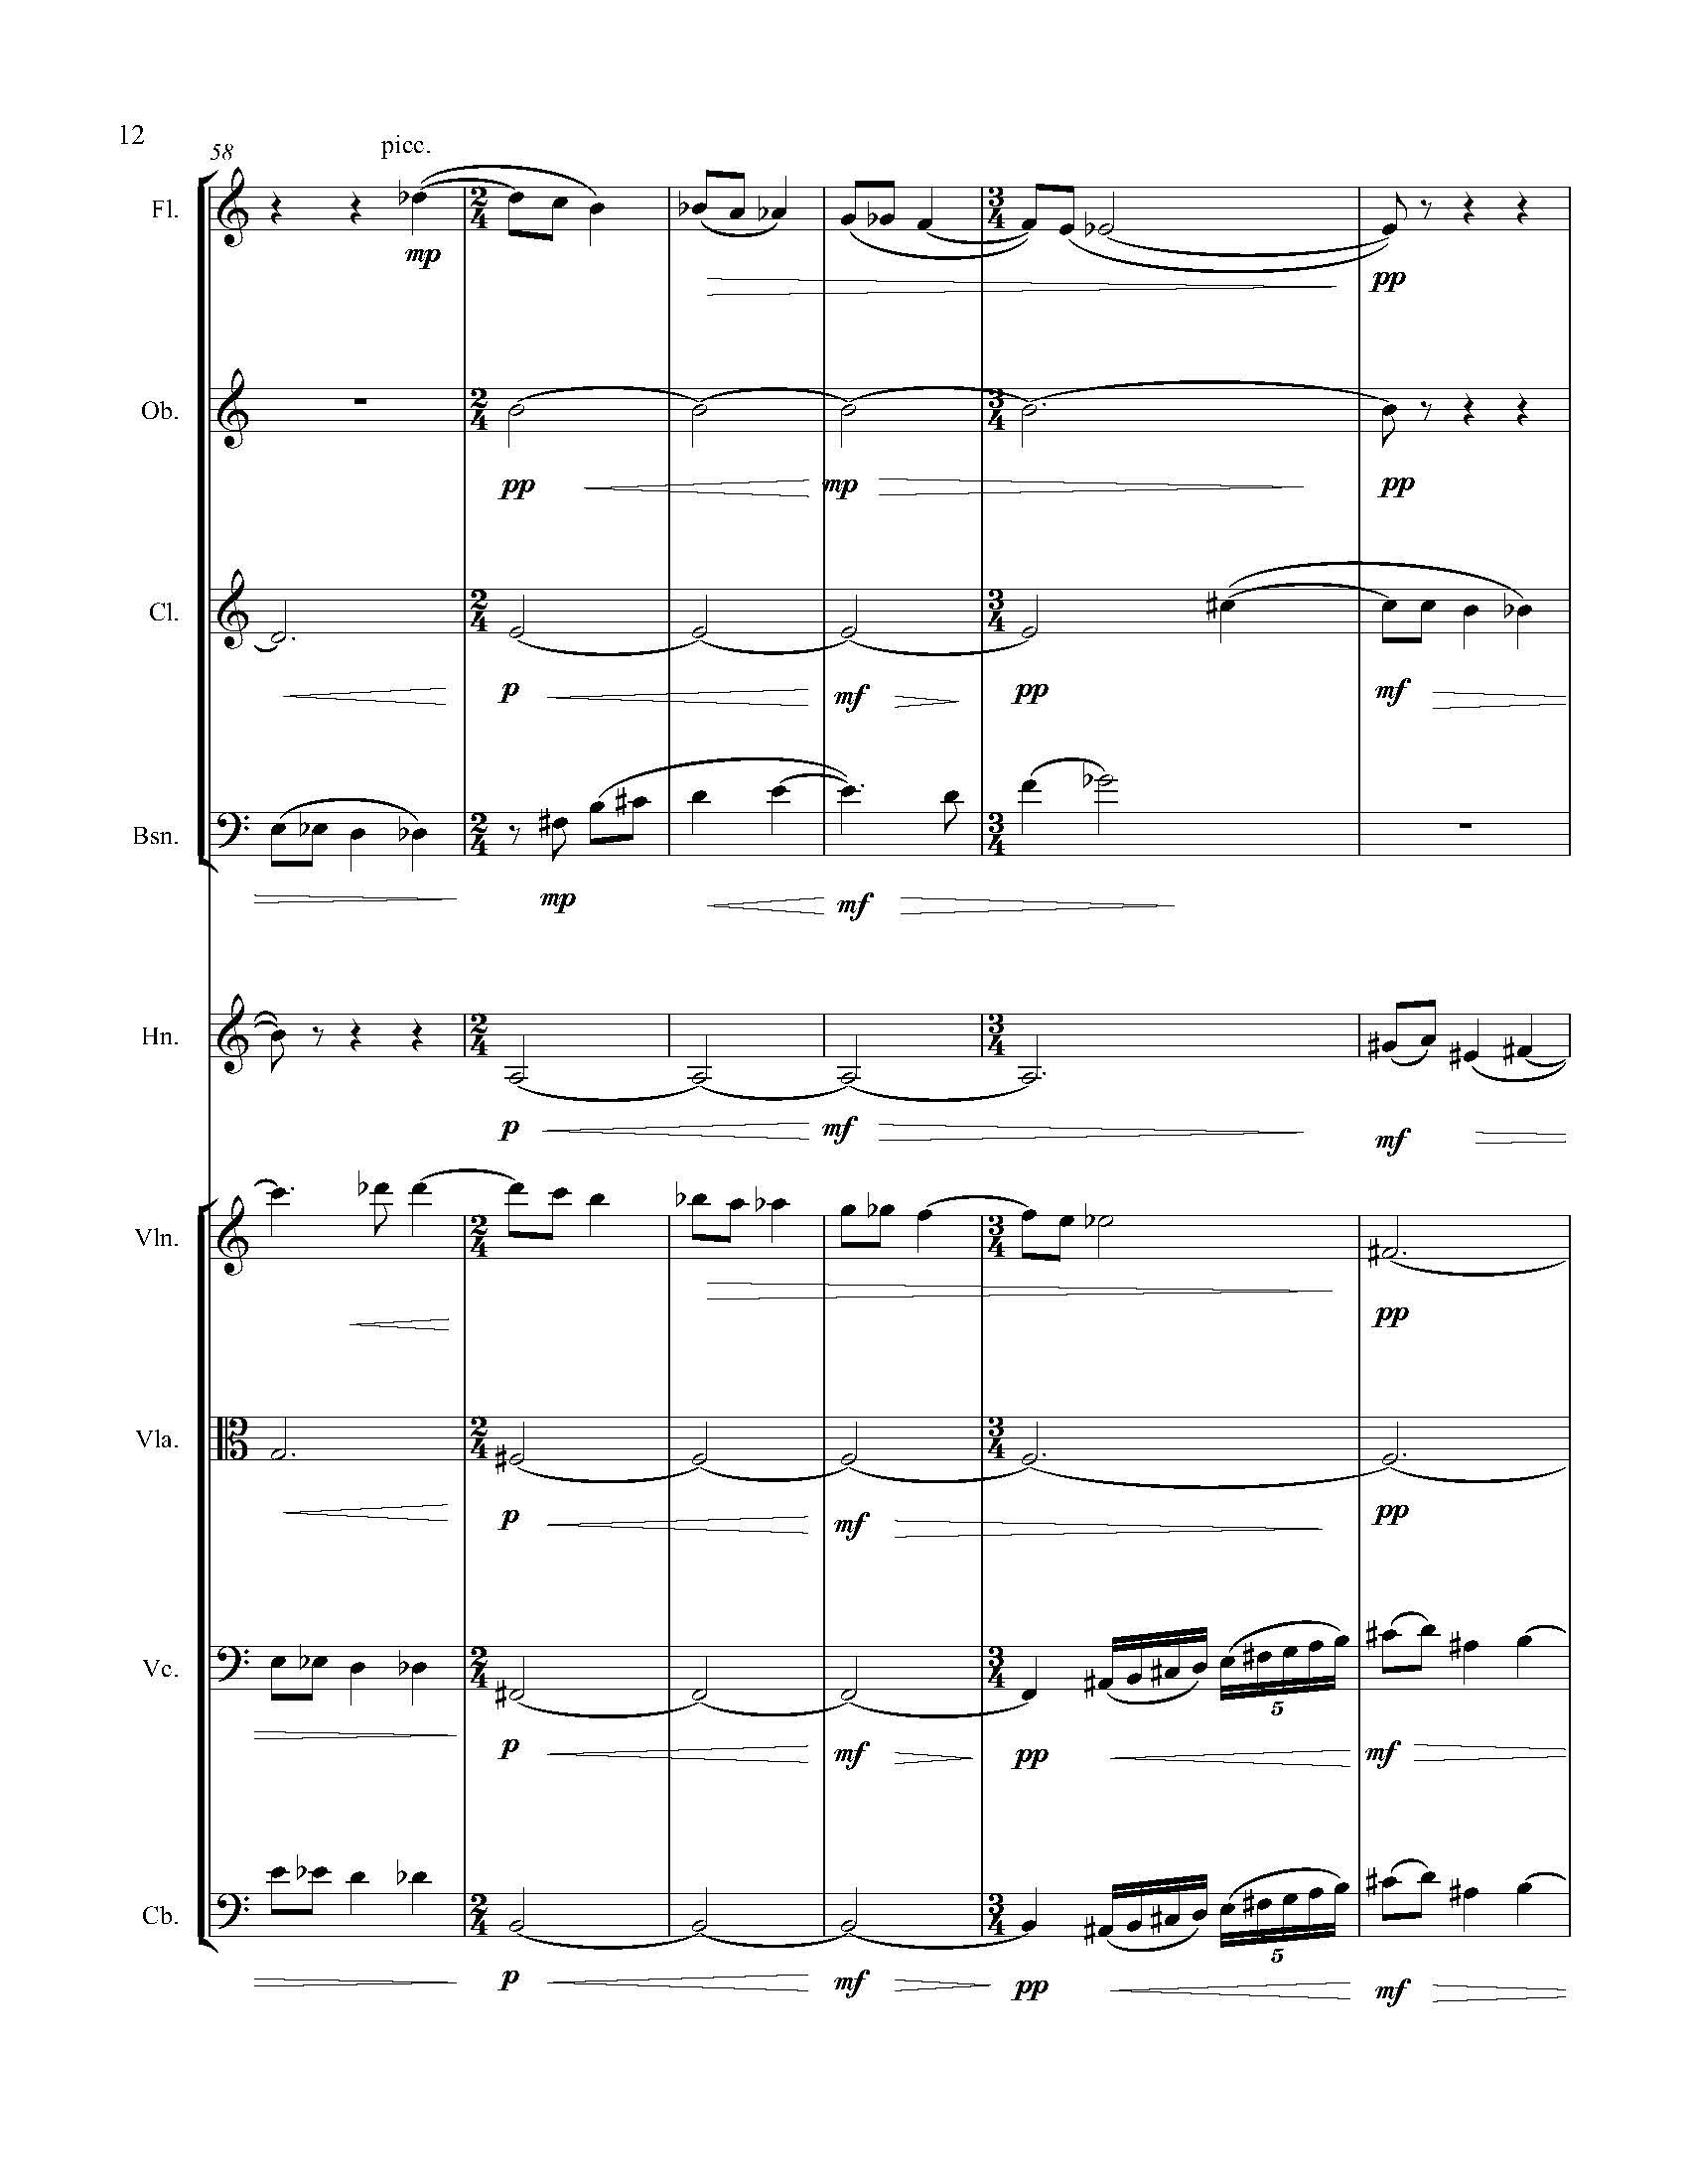 In Search of a Bird - Complete Score_Page_18.jpg